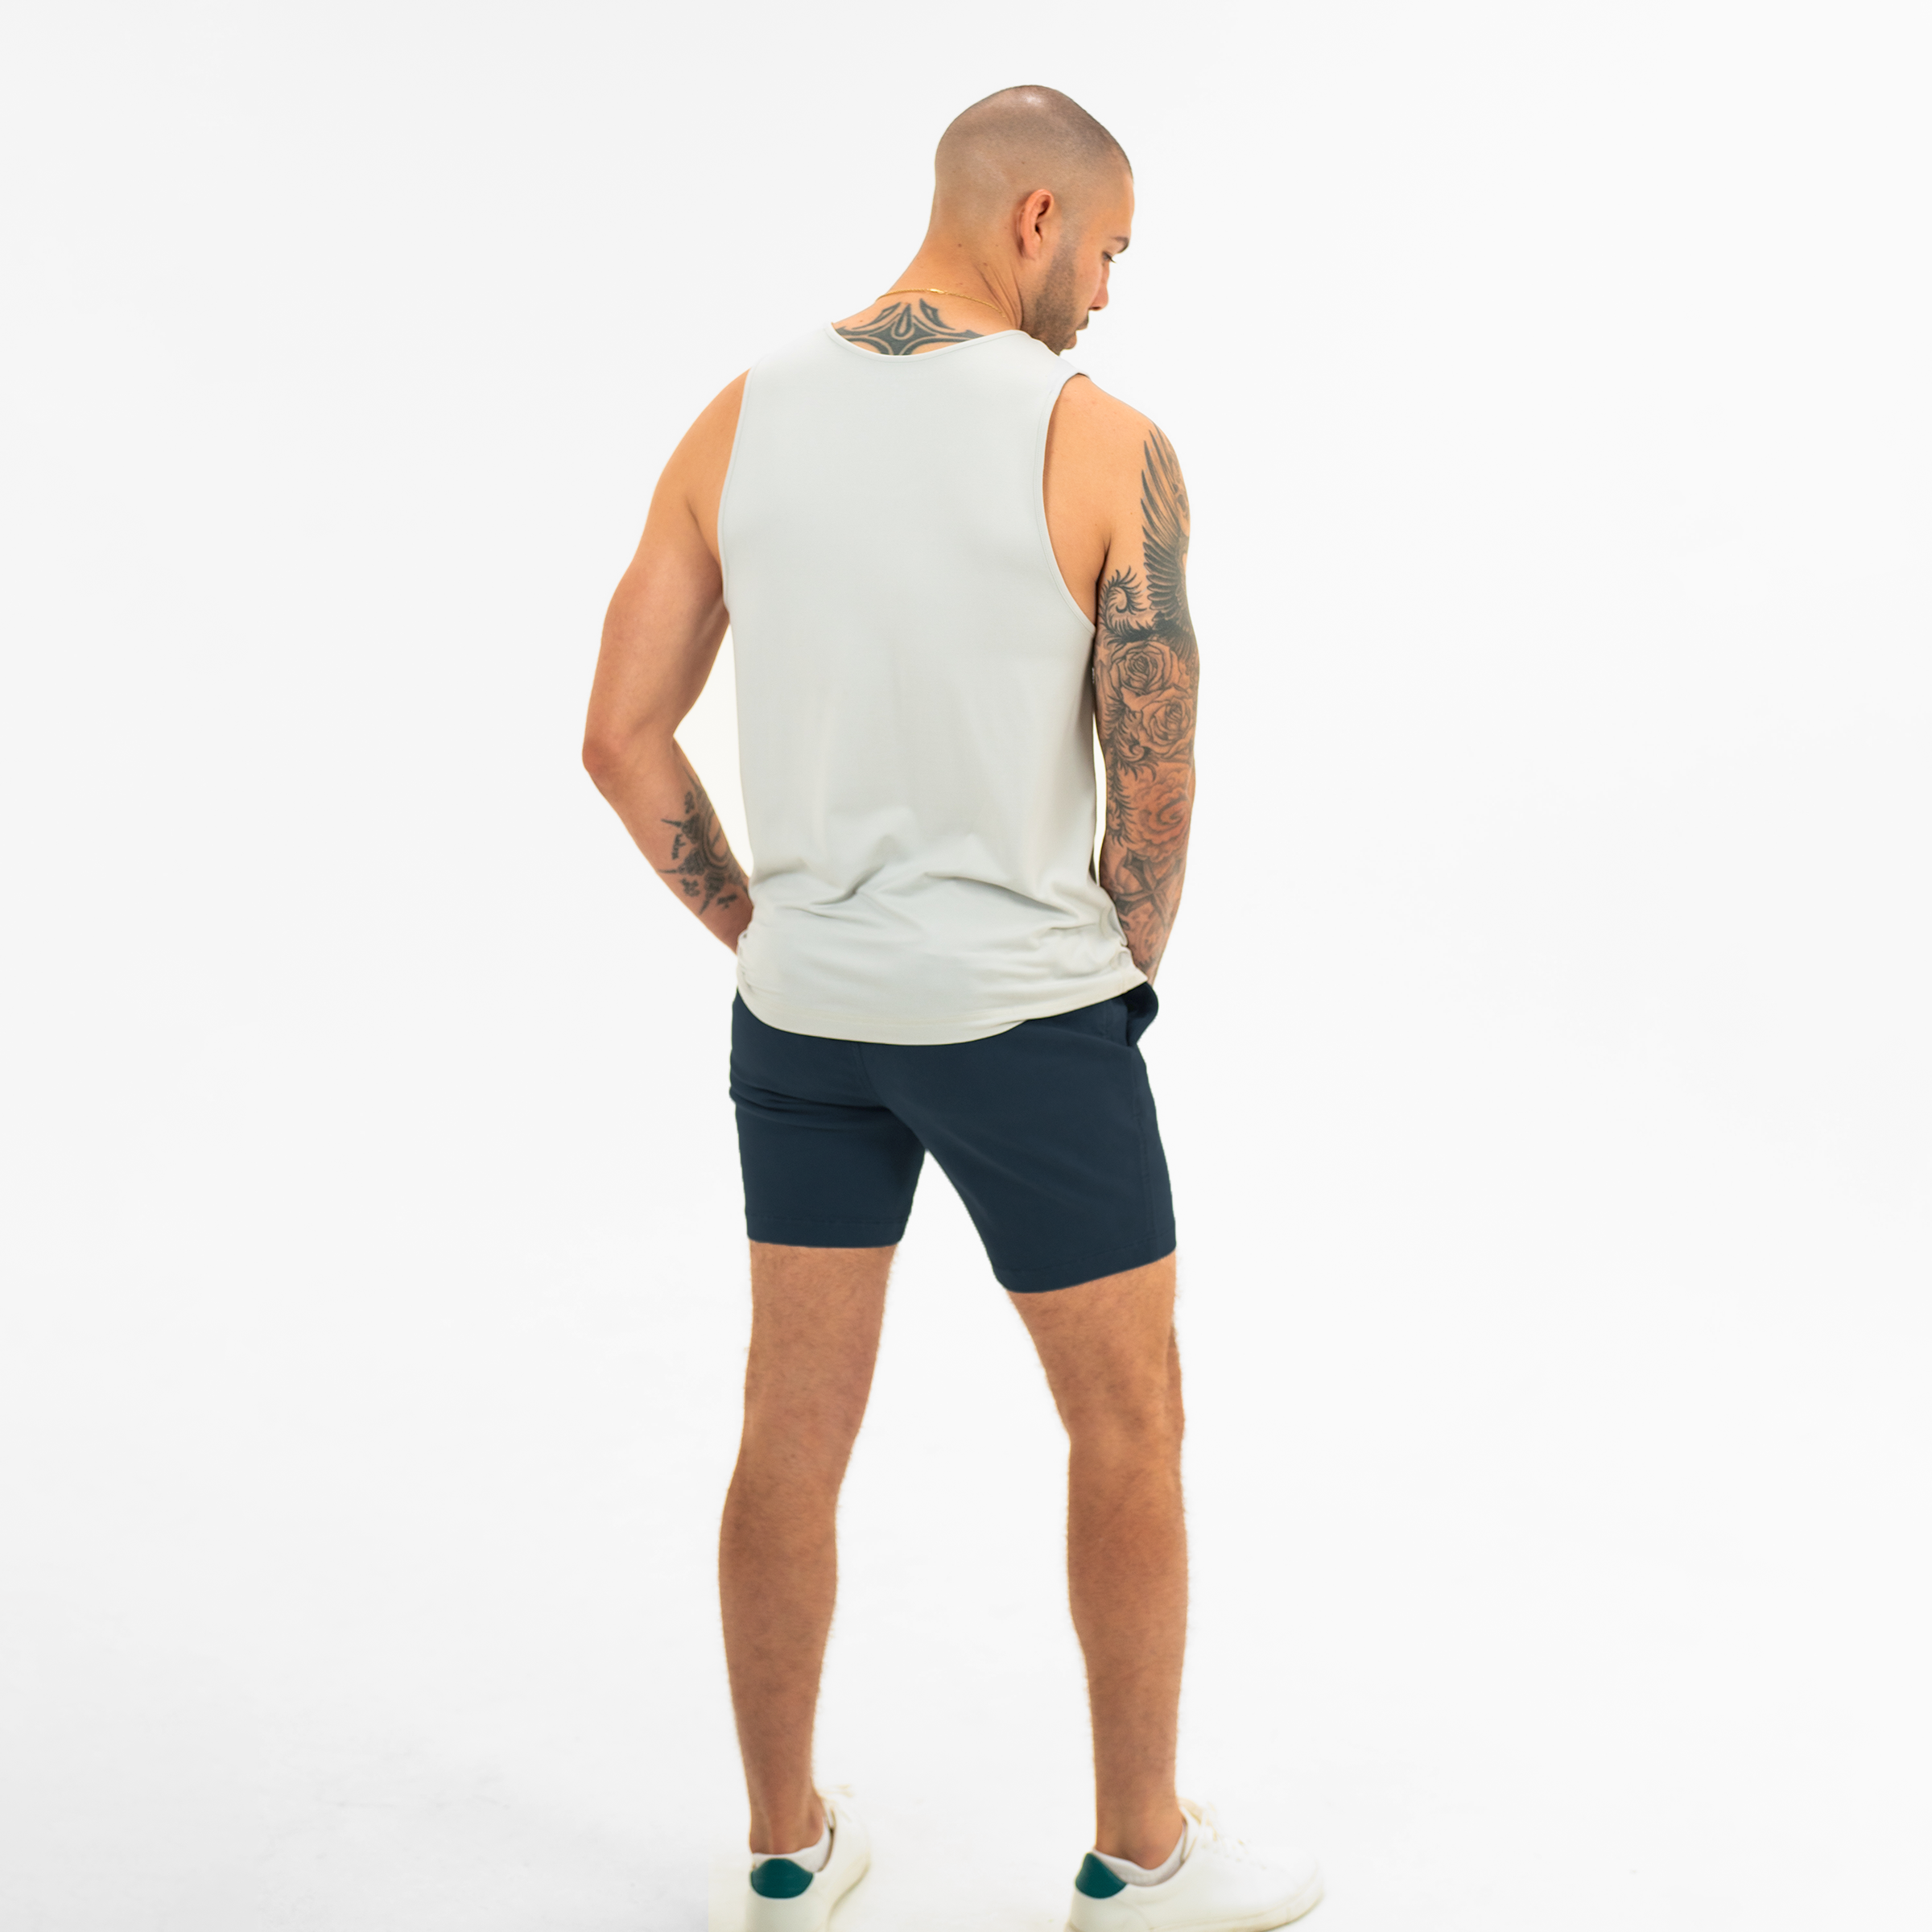 Alto Short 7" inseam in Navy back on model worn with Tech Tank in Quiet Grey